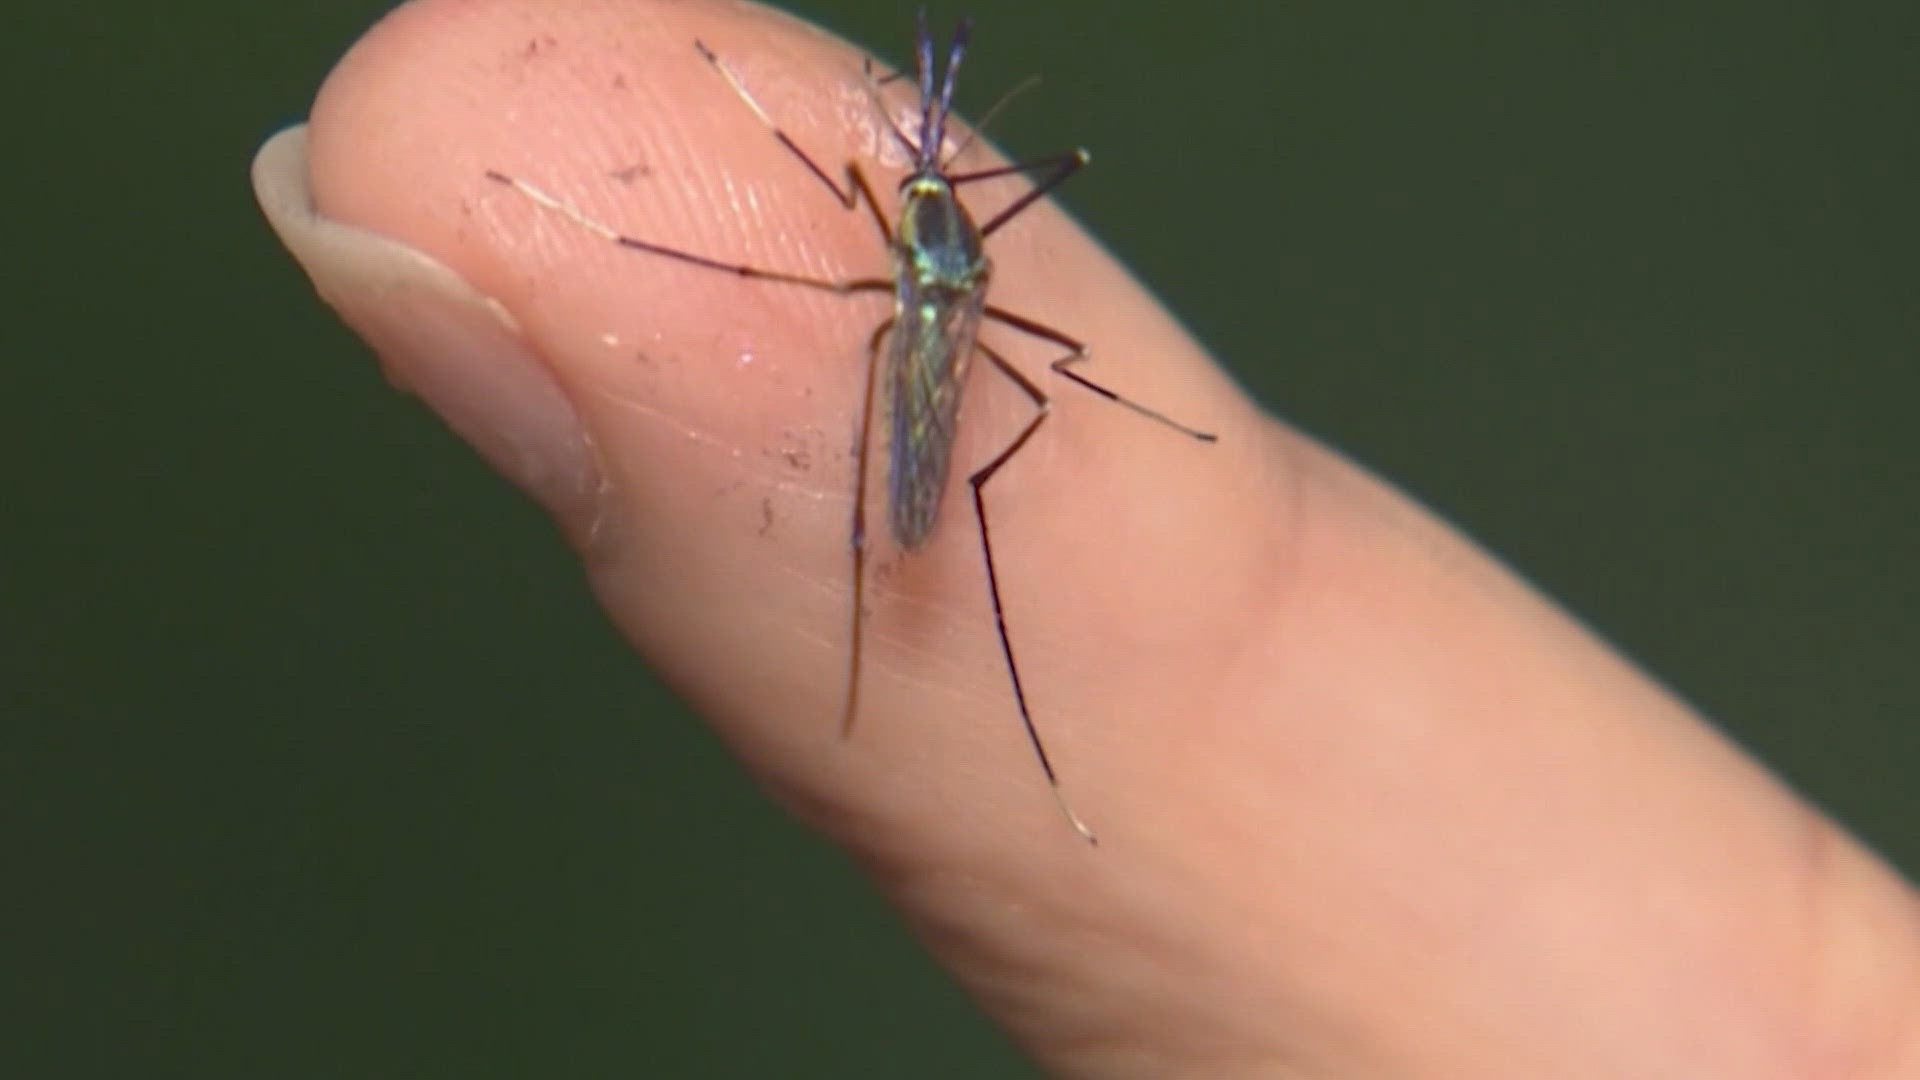 Spraying and testing for mosquitoes was a daily routine last year as more than 200 mosquito traps tested positive for the West Nile Virus.